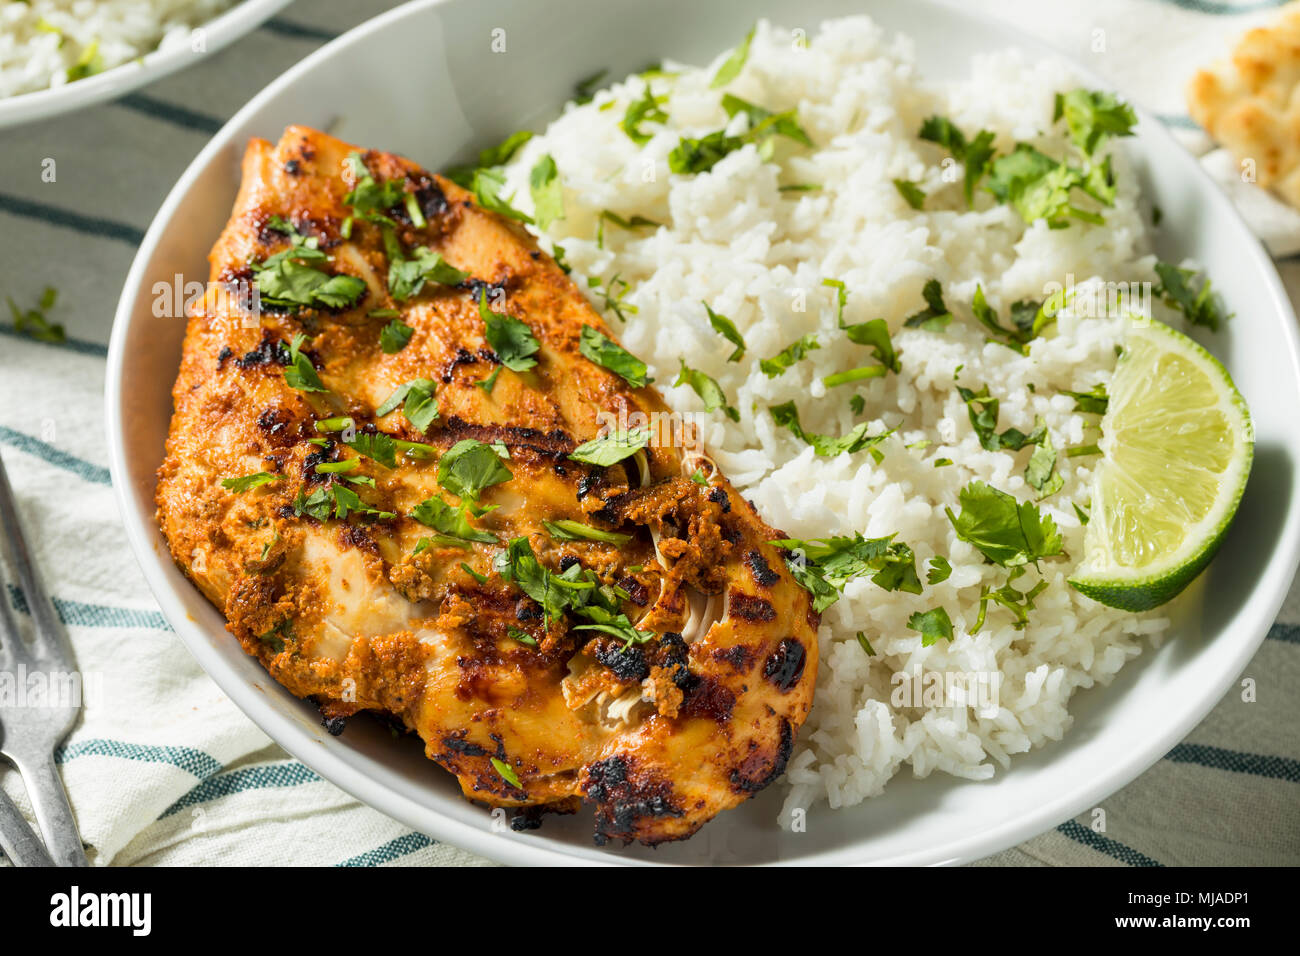 Homemade Indian Tandoori Chicken with Rice and Naan Bread Stock Photo